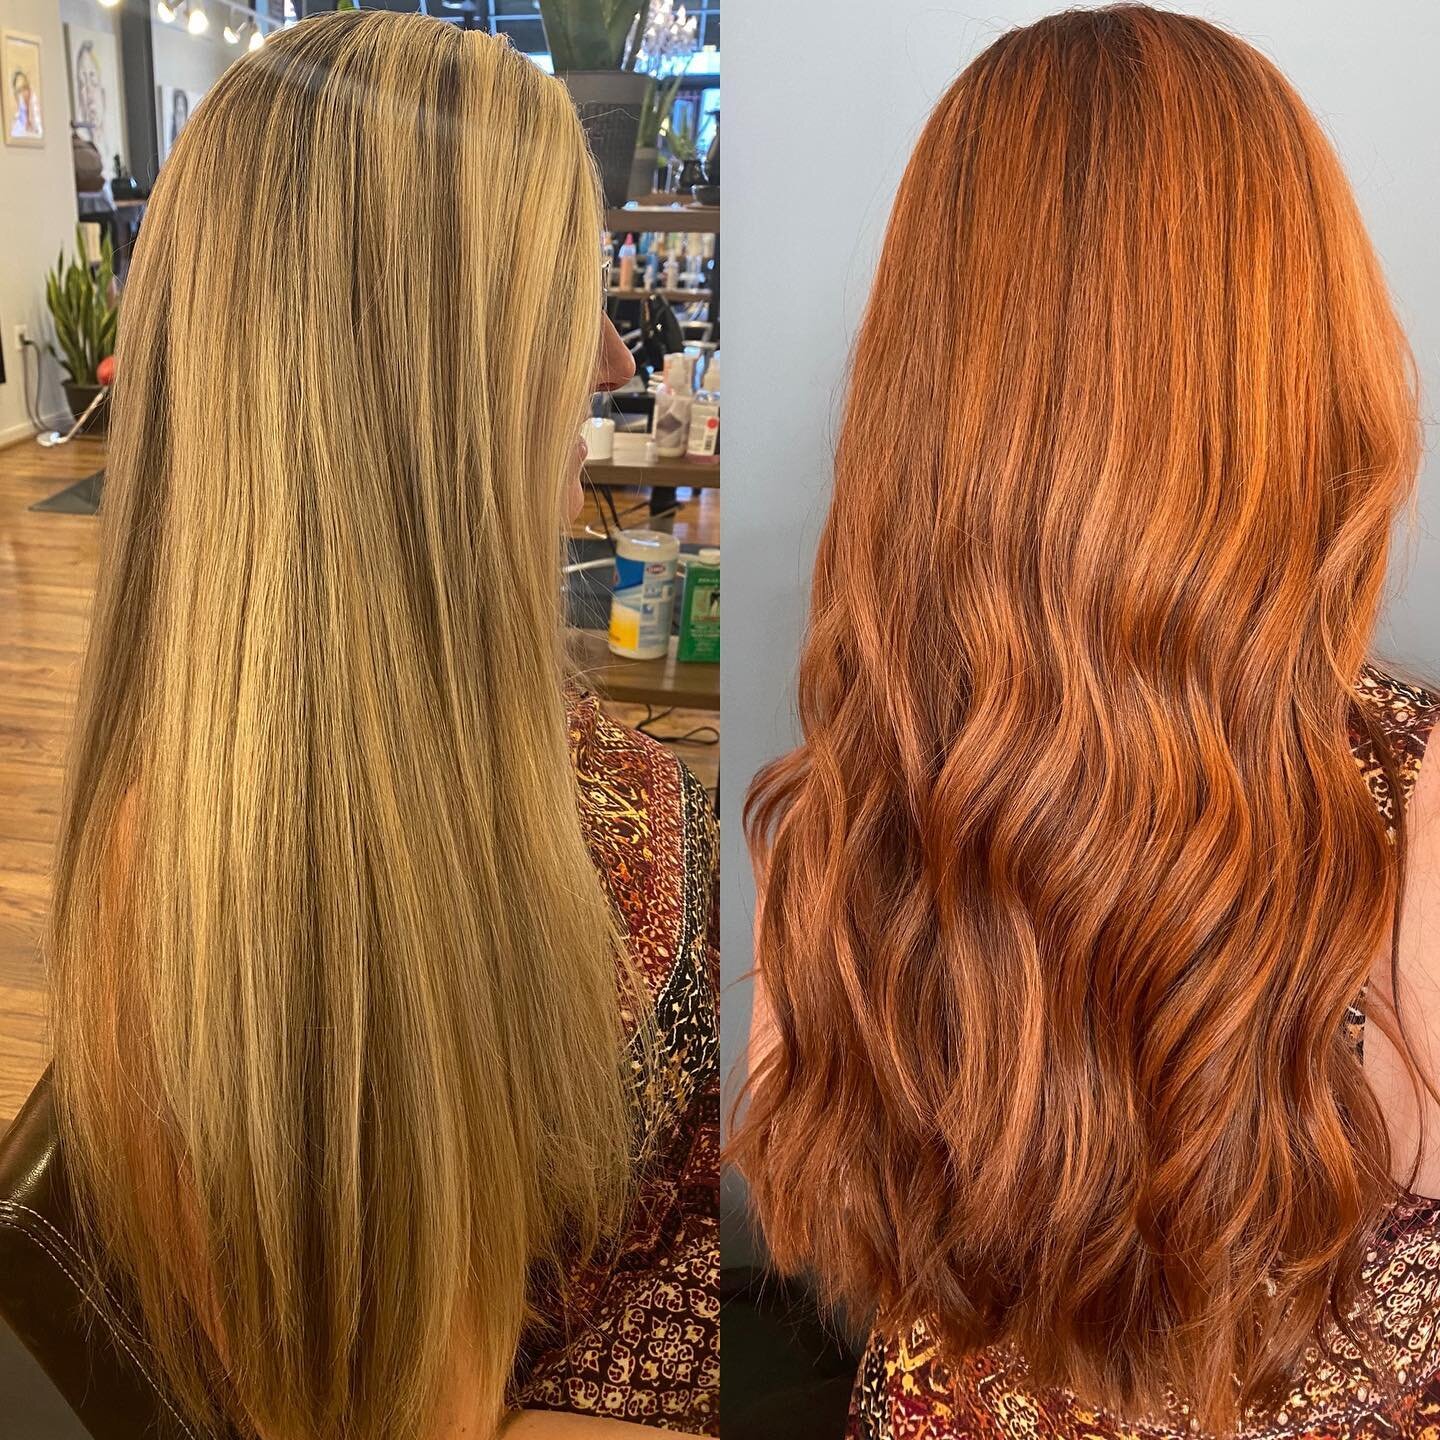 I looooove taking blondes to the copper side 🧡